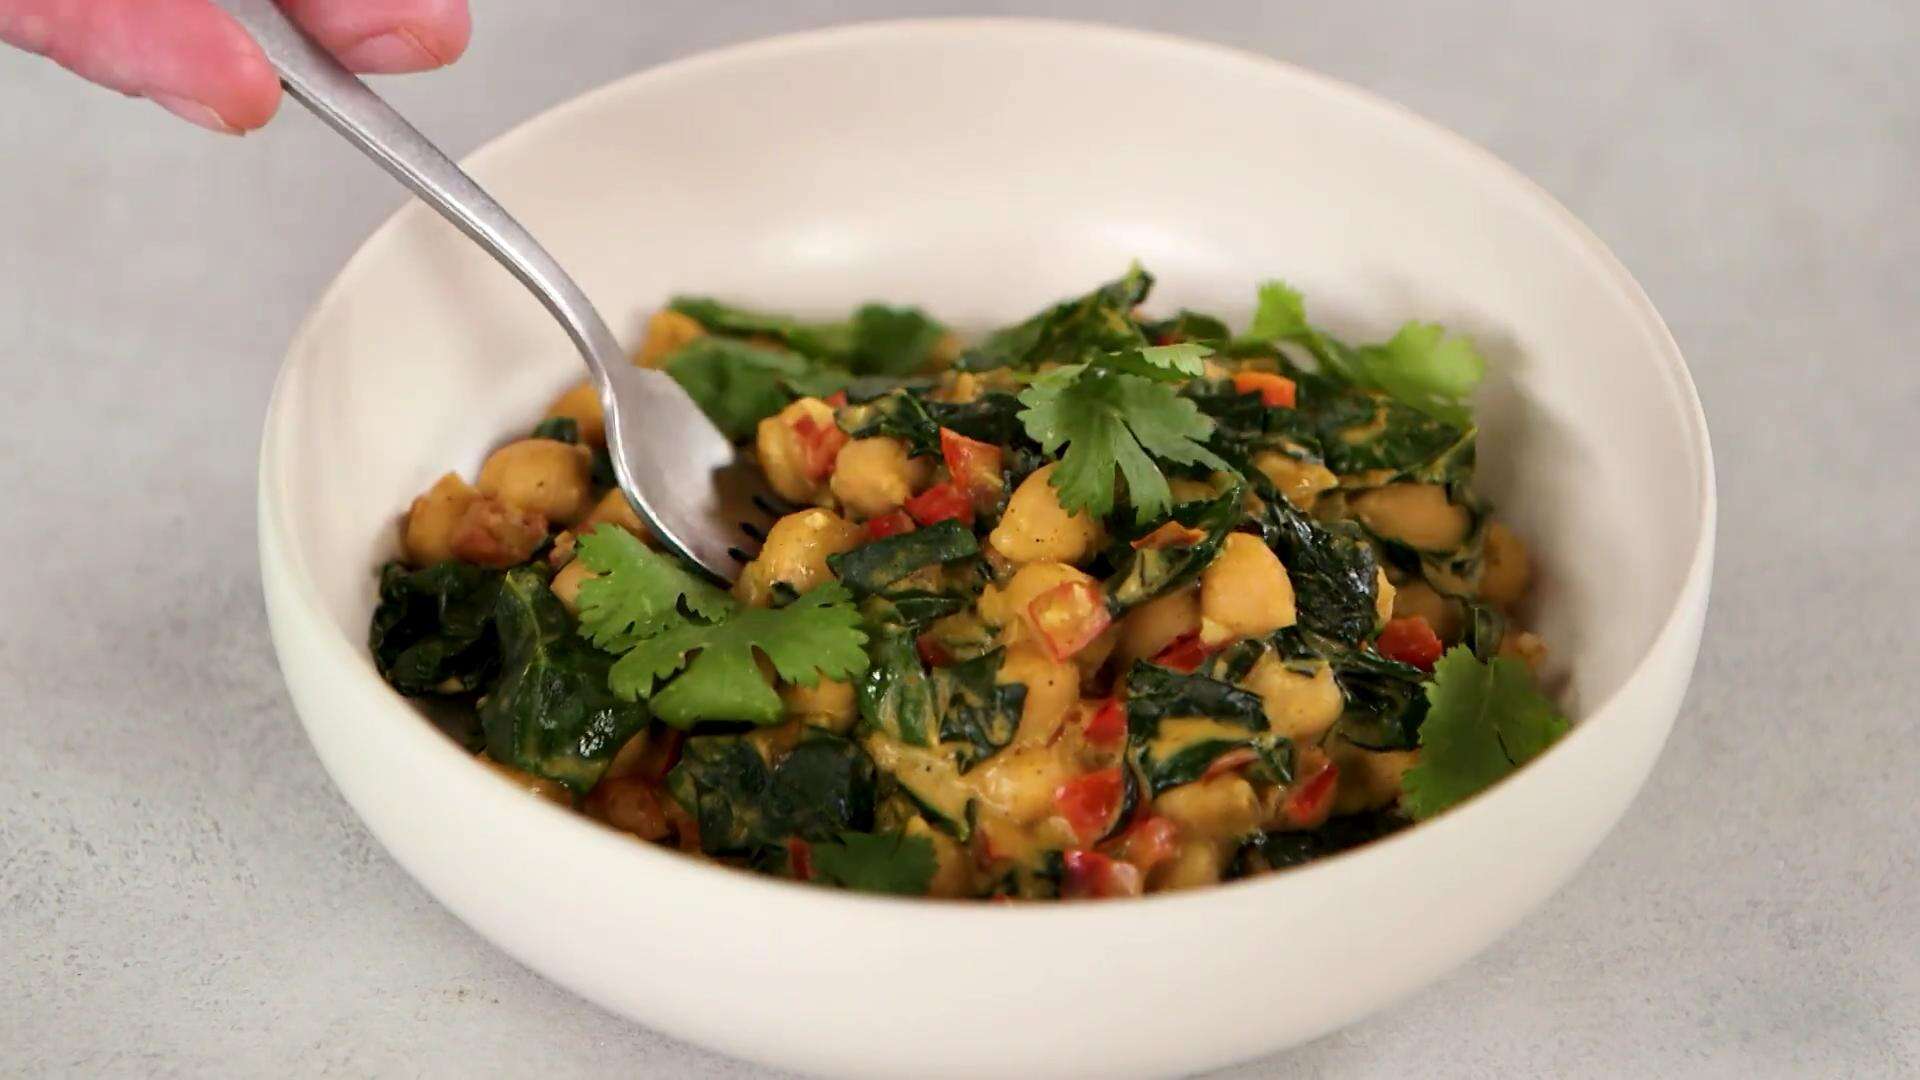 How to Make Chickpea and Kale Curry | Cooking Light